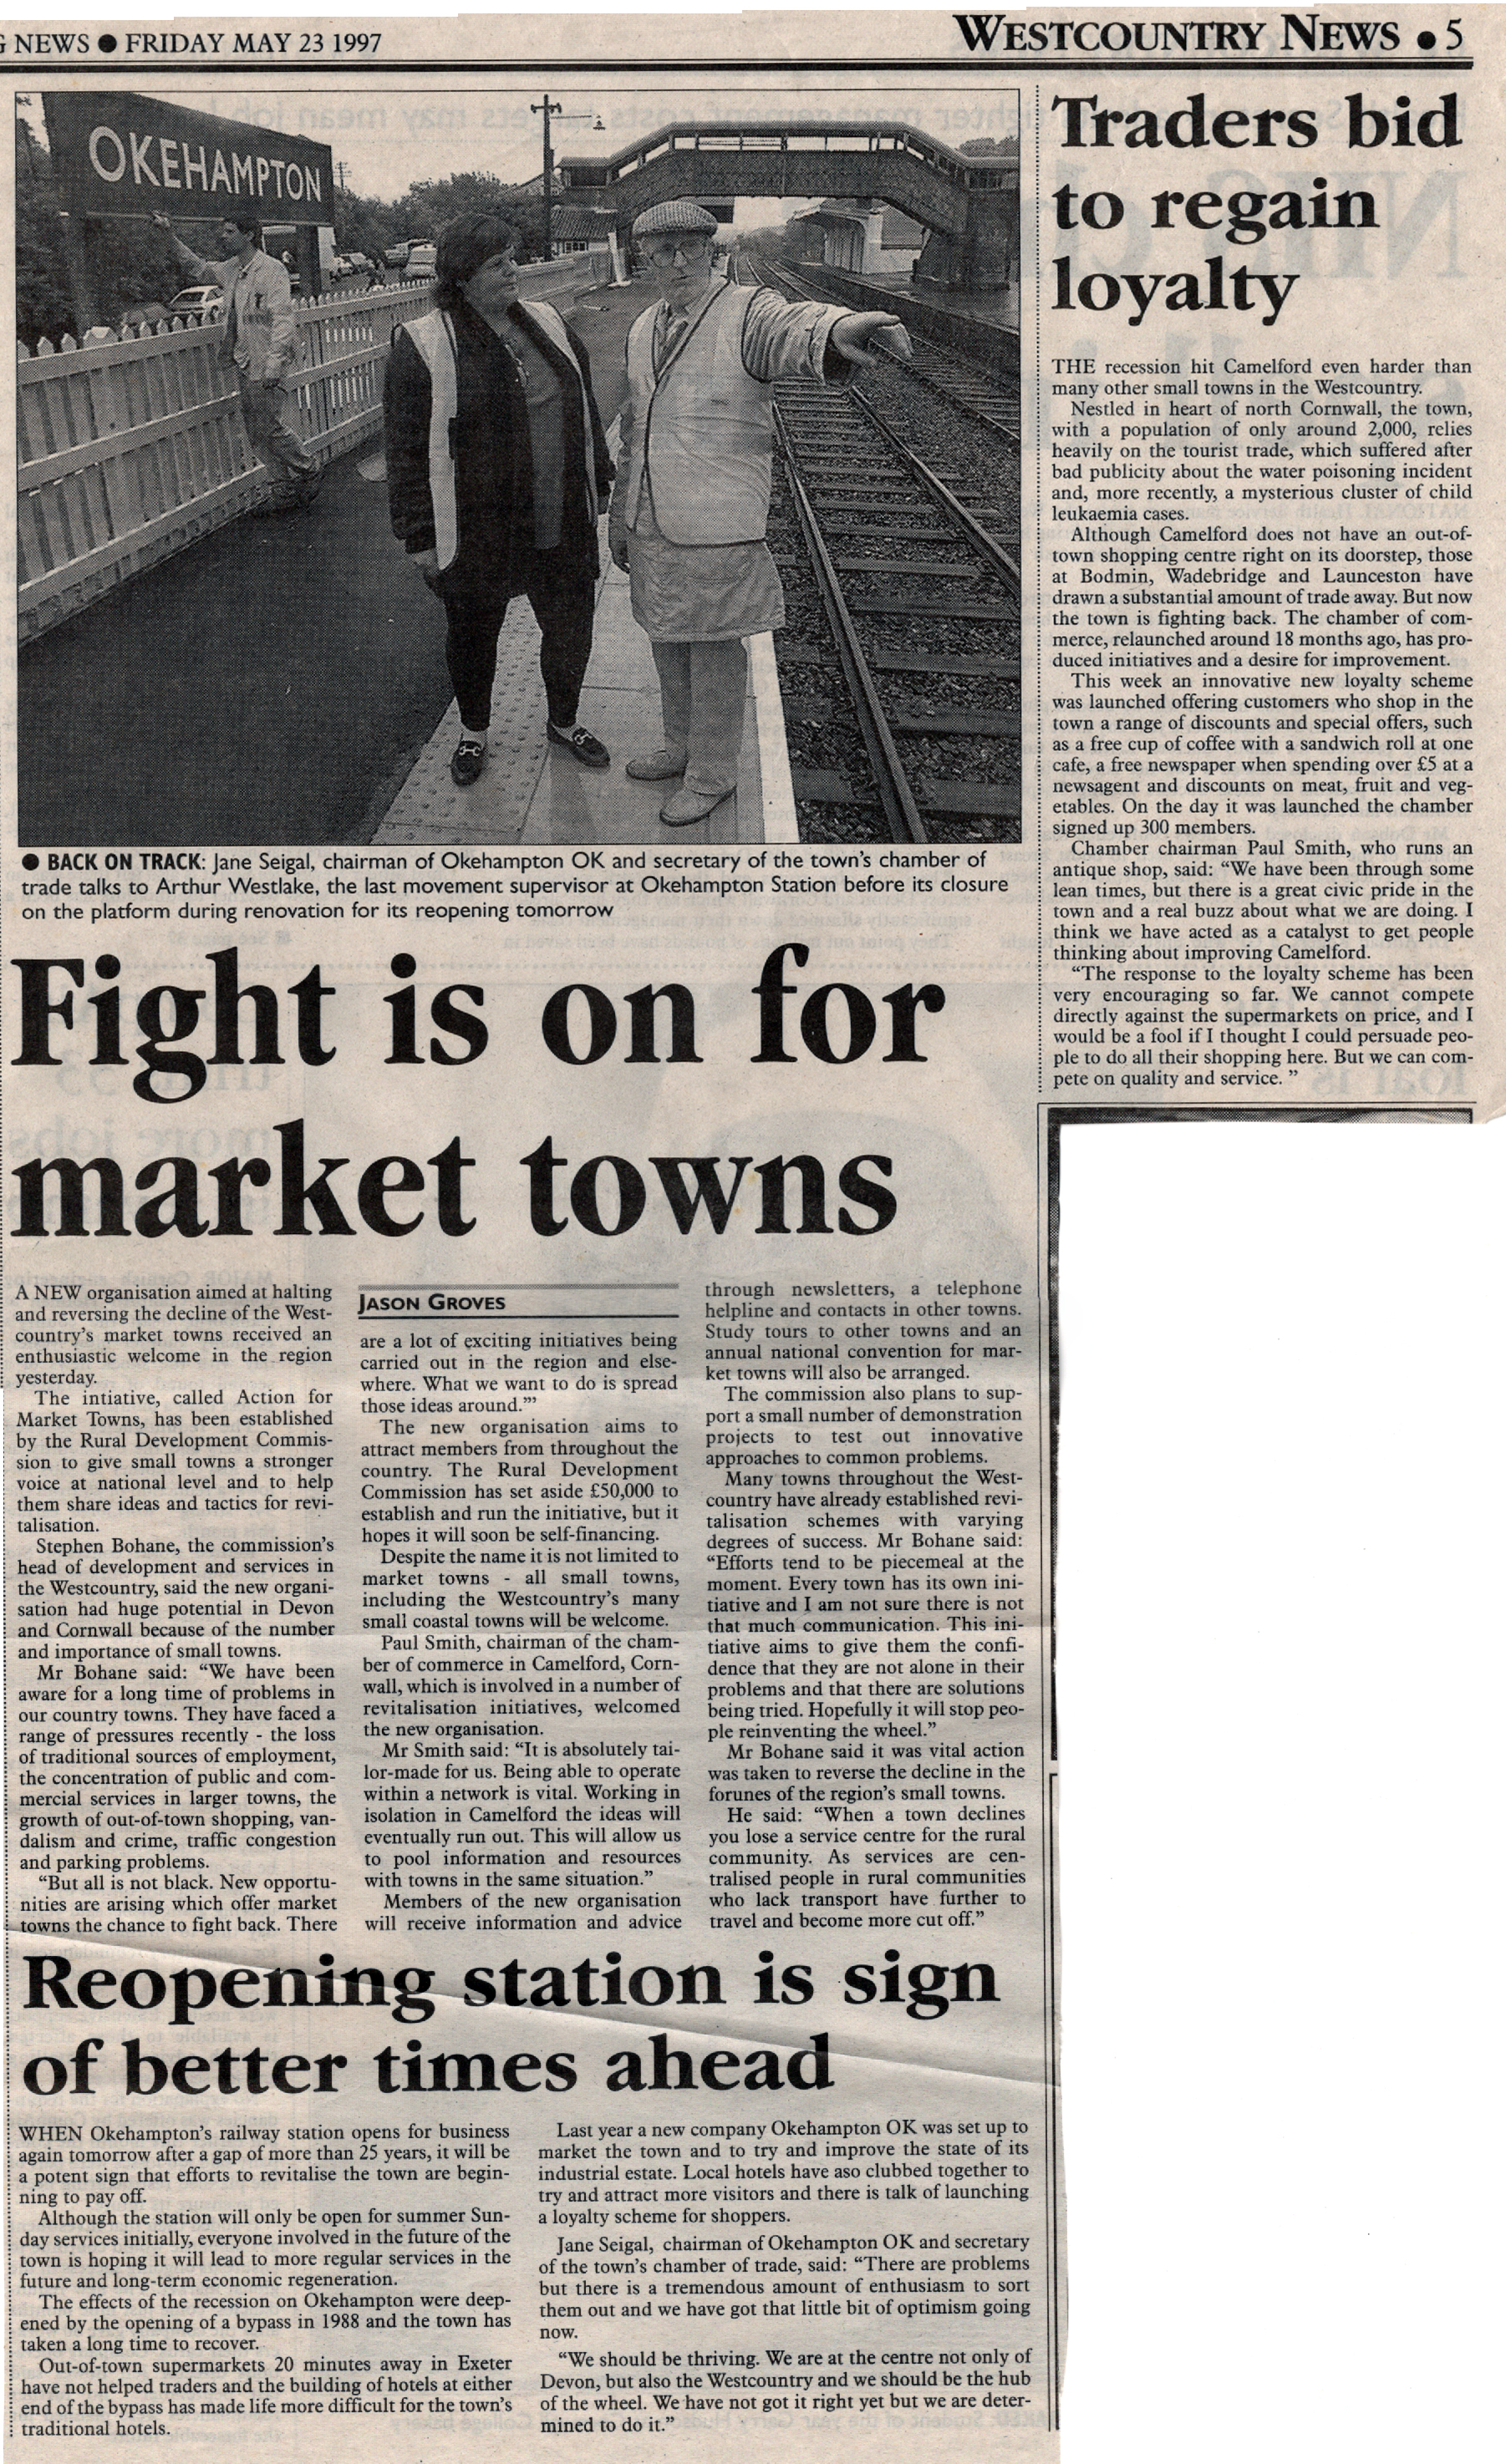 1997 article on the re-opening of Okehampton Station.